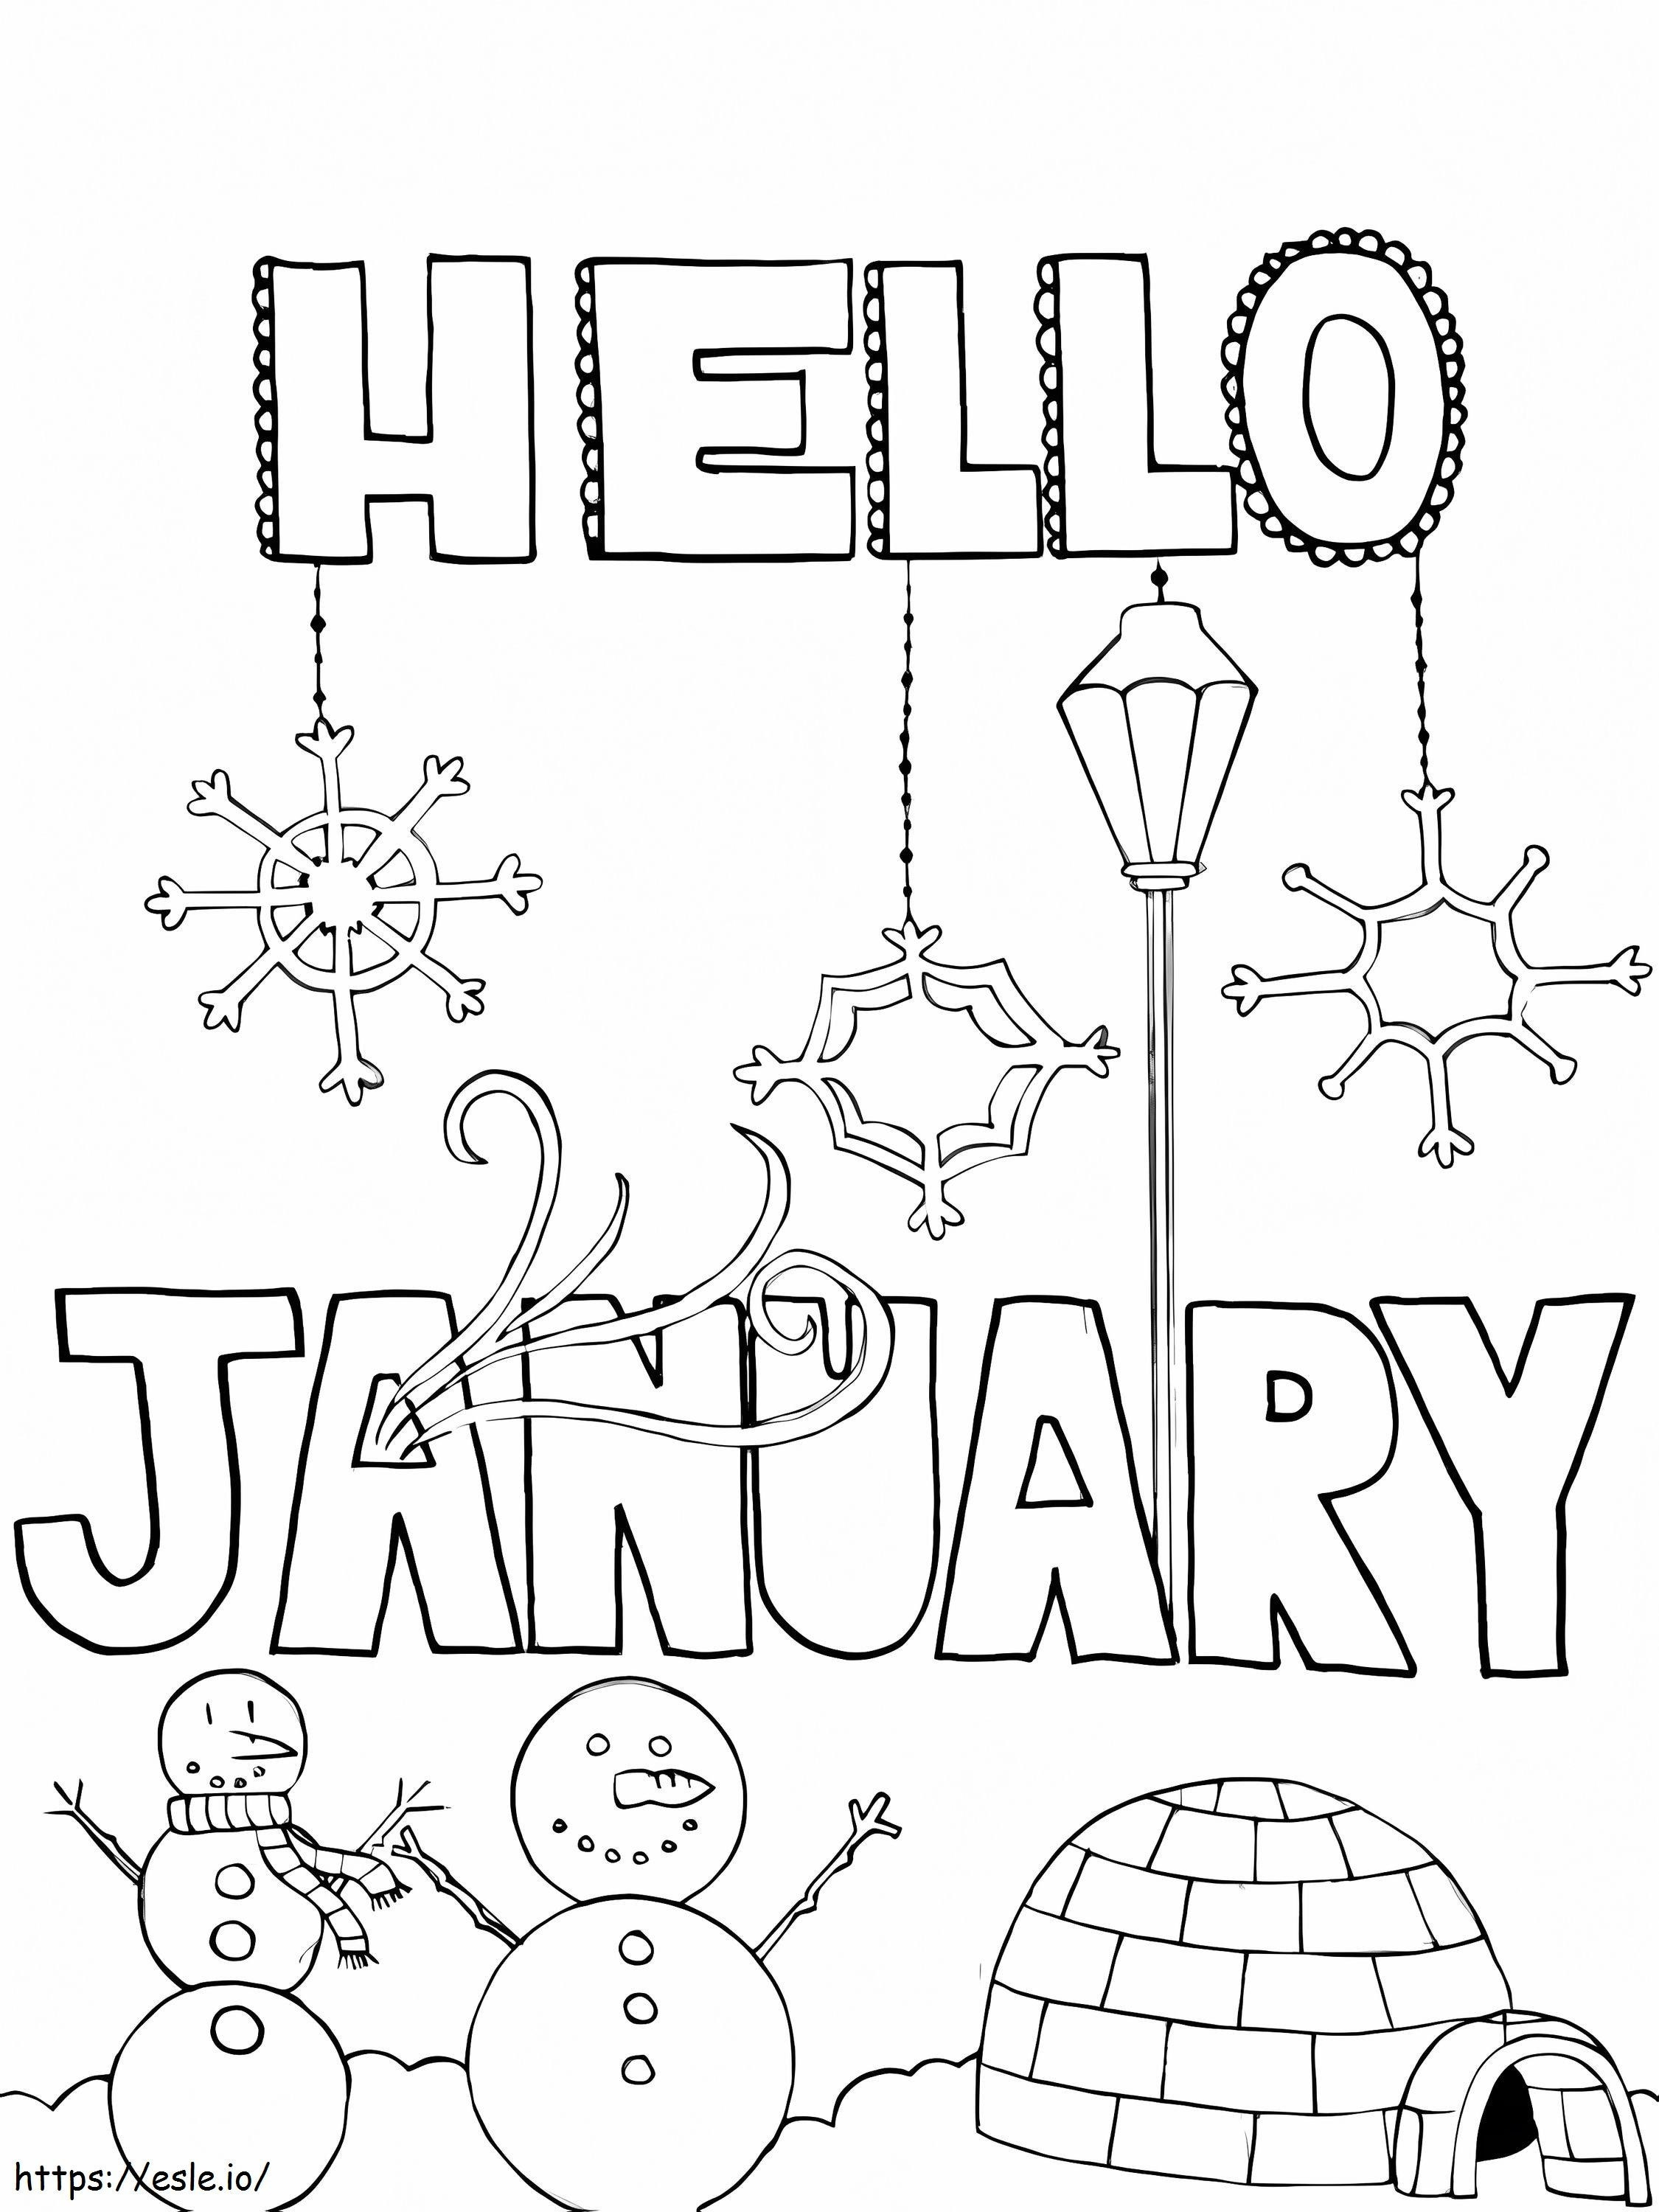 Hello January coloring page